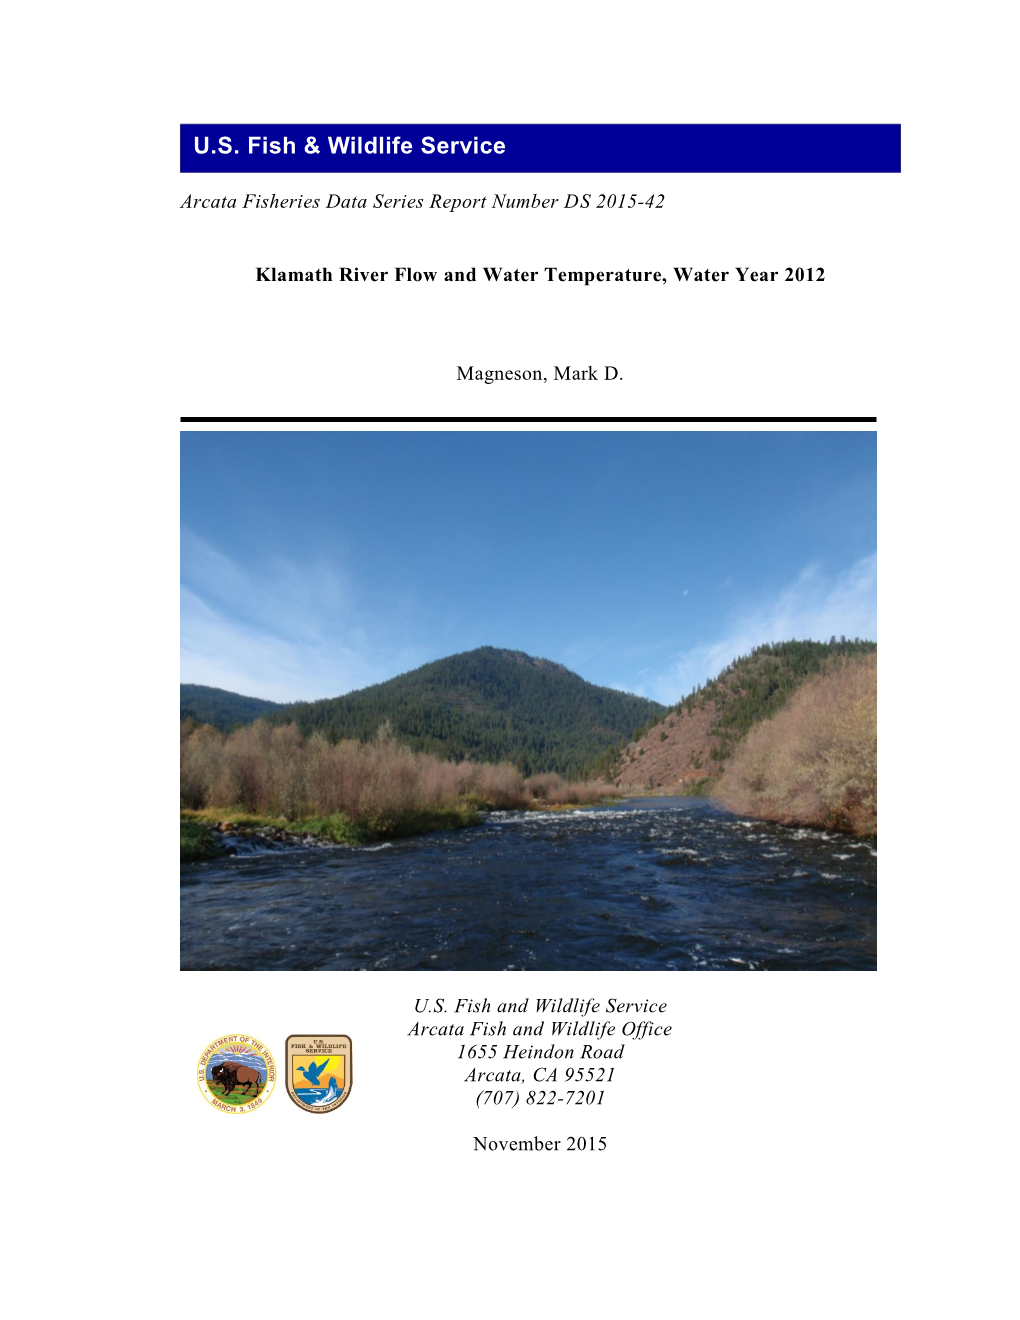 Klamath River Flow and Water Temperature, Water Year 2012